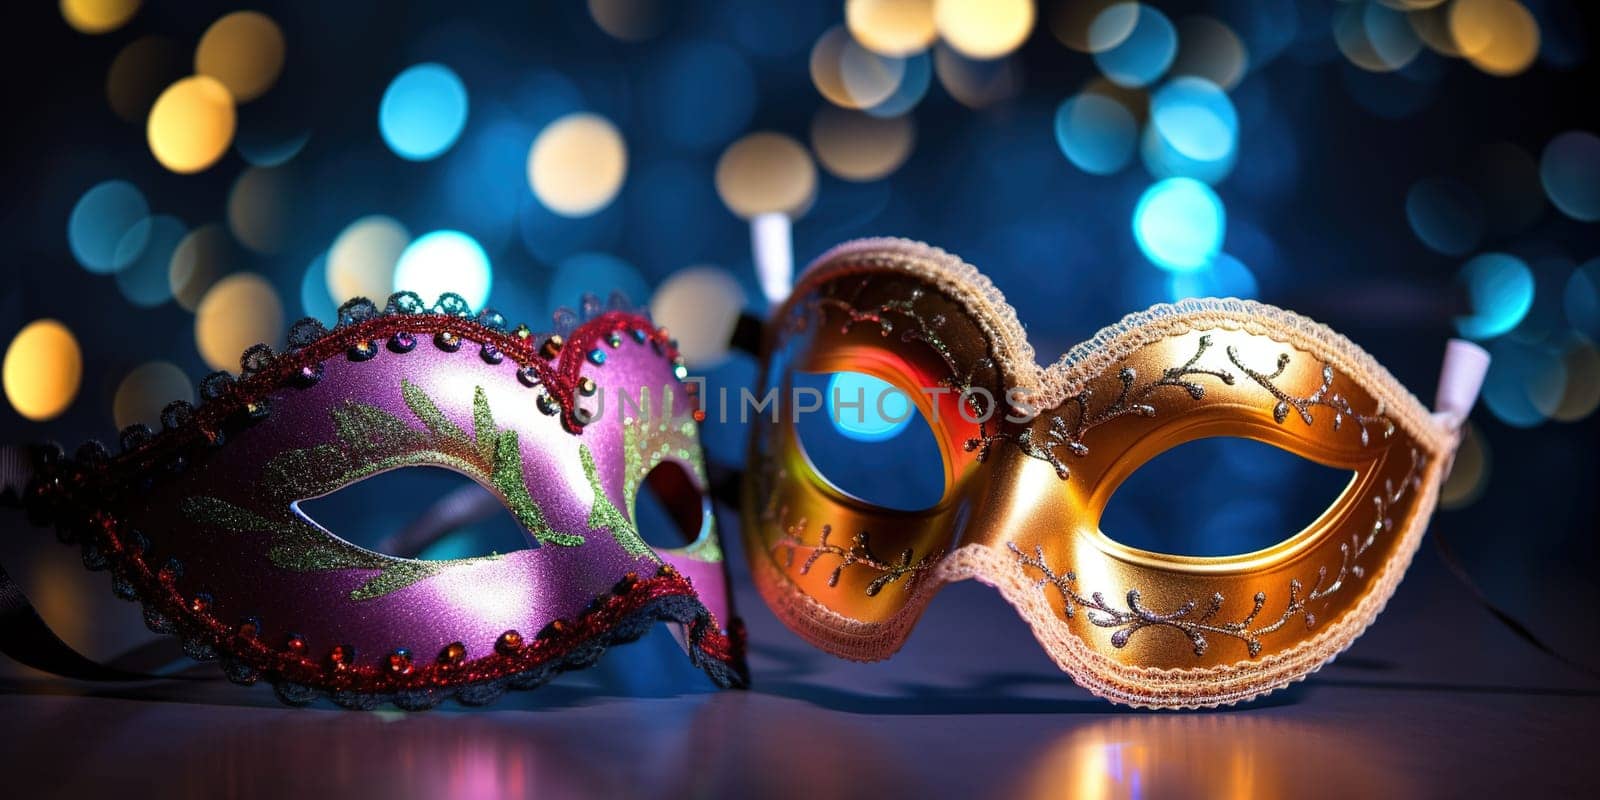 Carnival Eye Masks For A Party by tan4ikk1